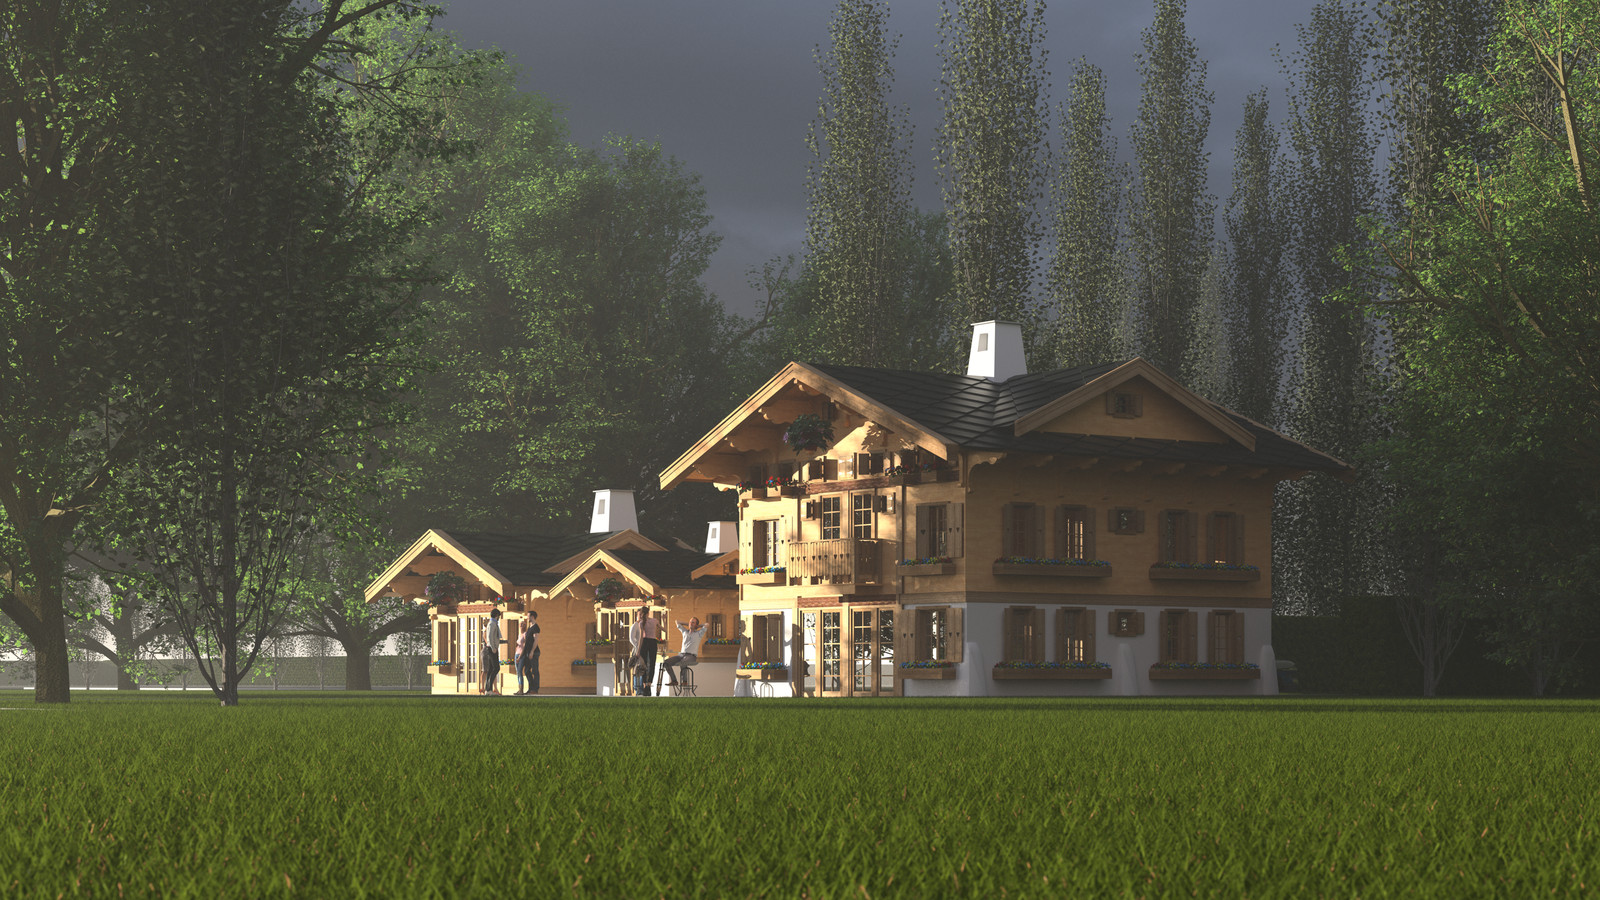 Sketchup 2018 + Thea Render 
This one is just for fun testing Thea 
Chalet large-Scene 6 252 hdr fog

HDR by HDRI-SKIES​ found here: http://hdri-skies.com/shop/hdri-sky-252/